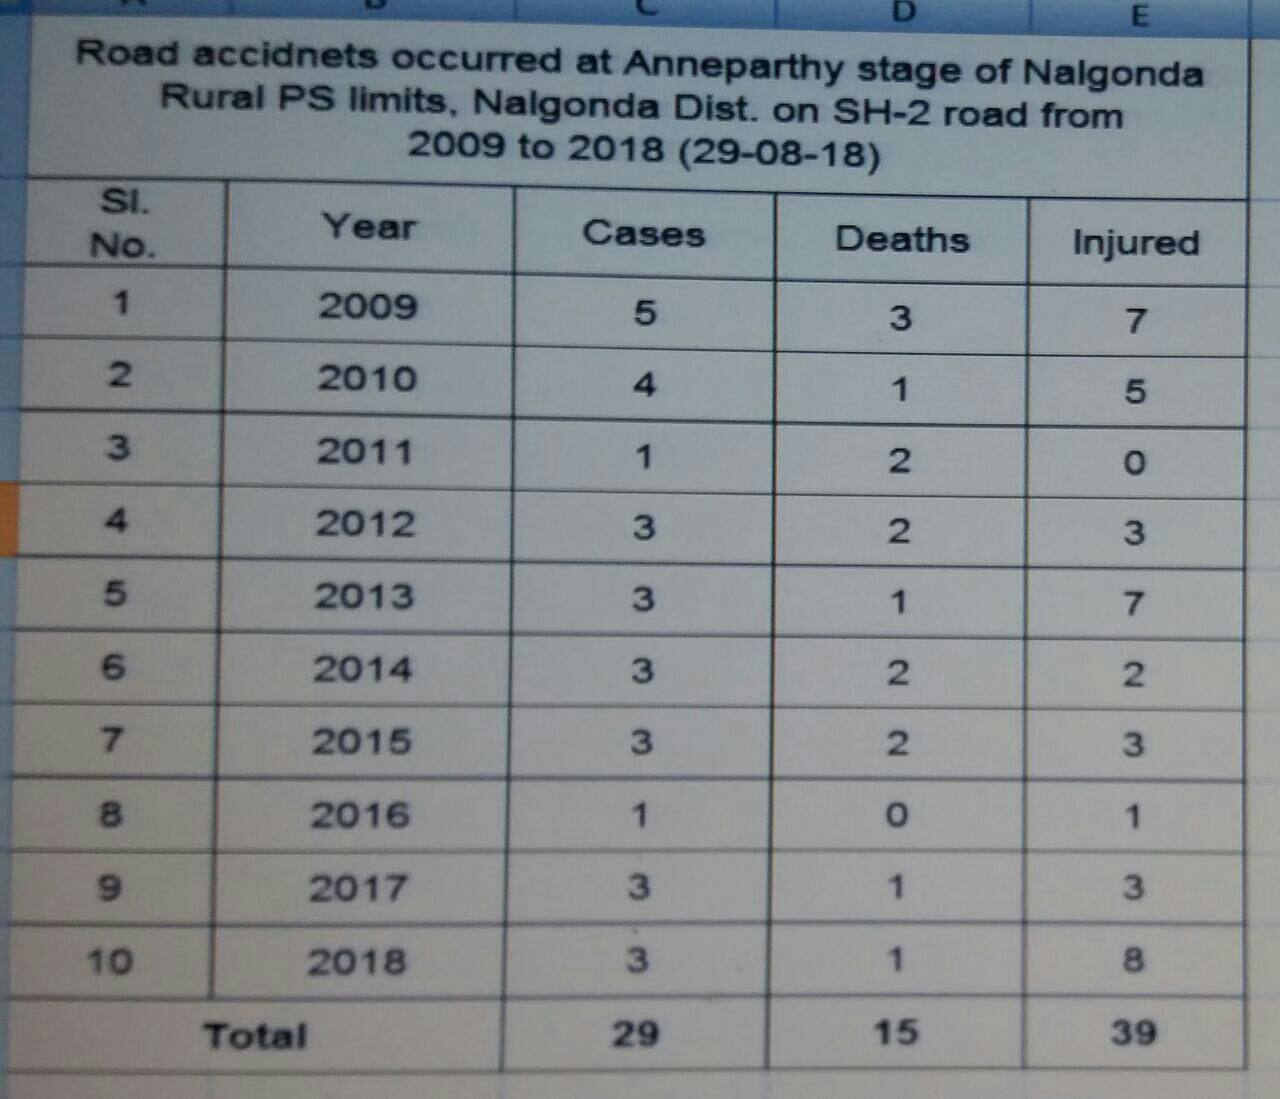 Anneparthy accident zone:15 persons died from 2009 till now